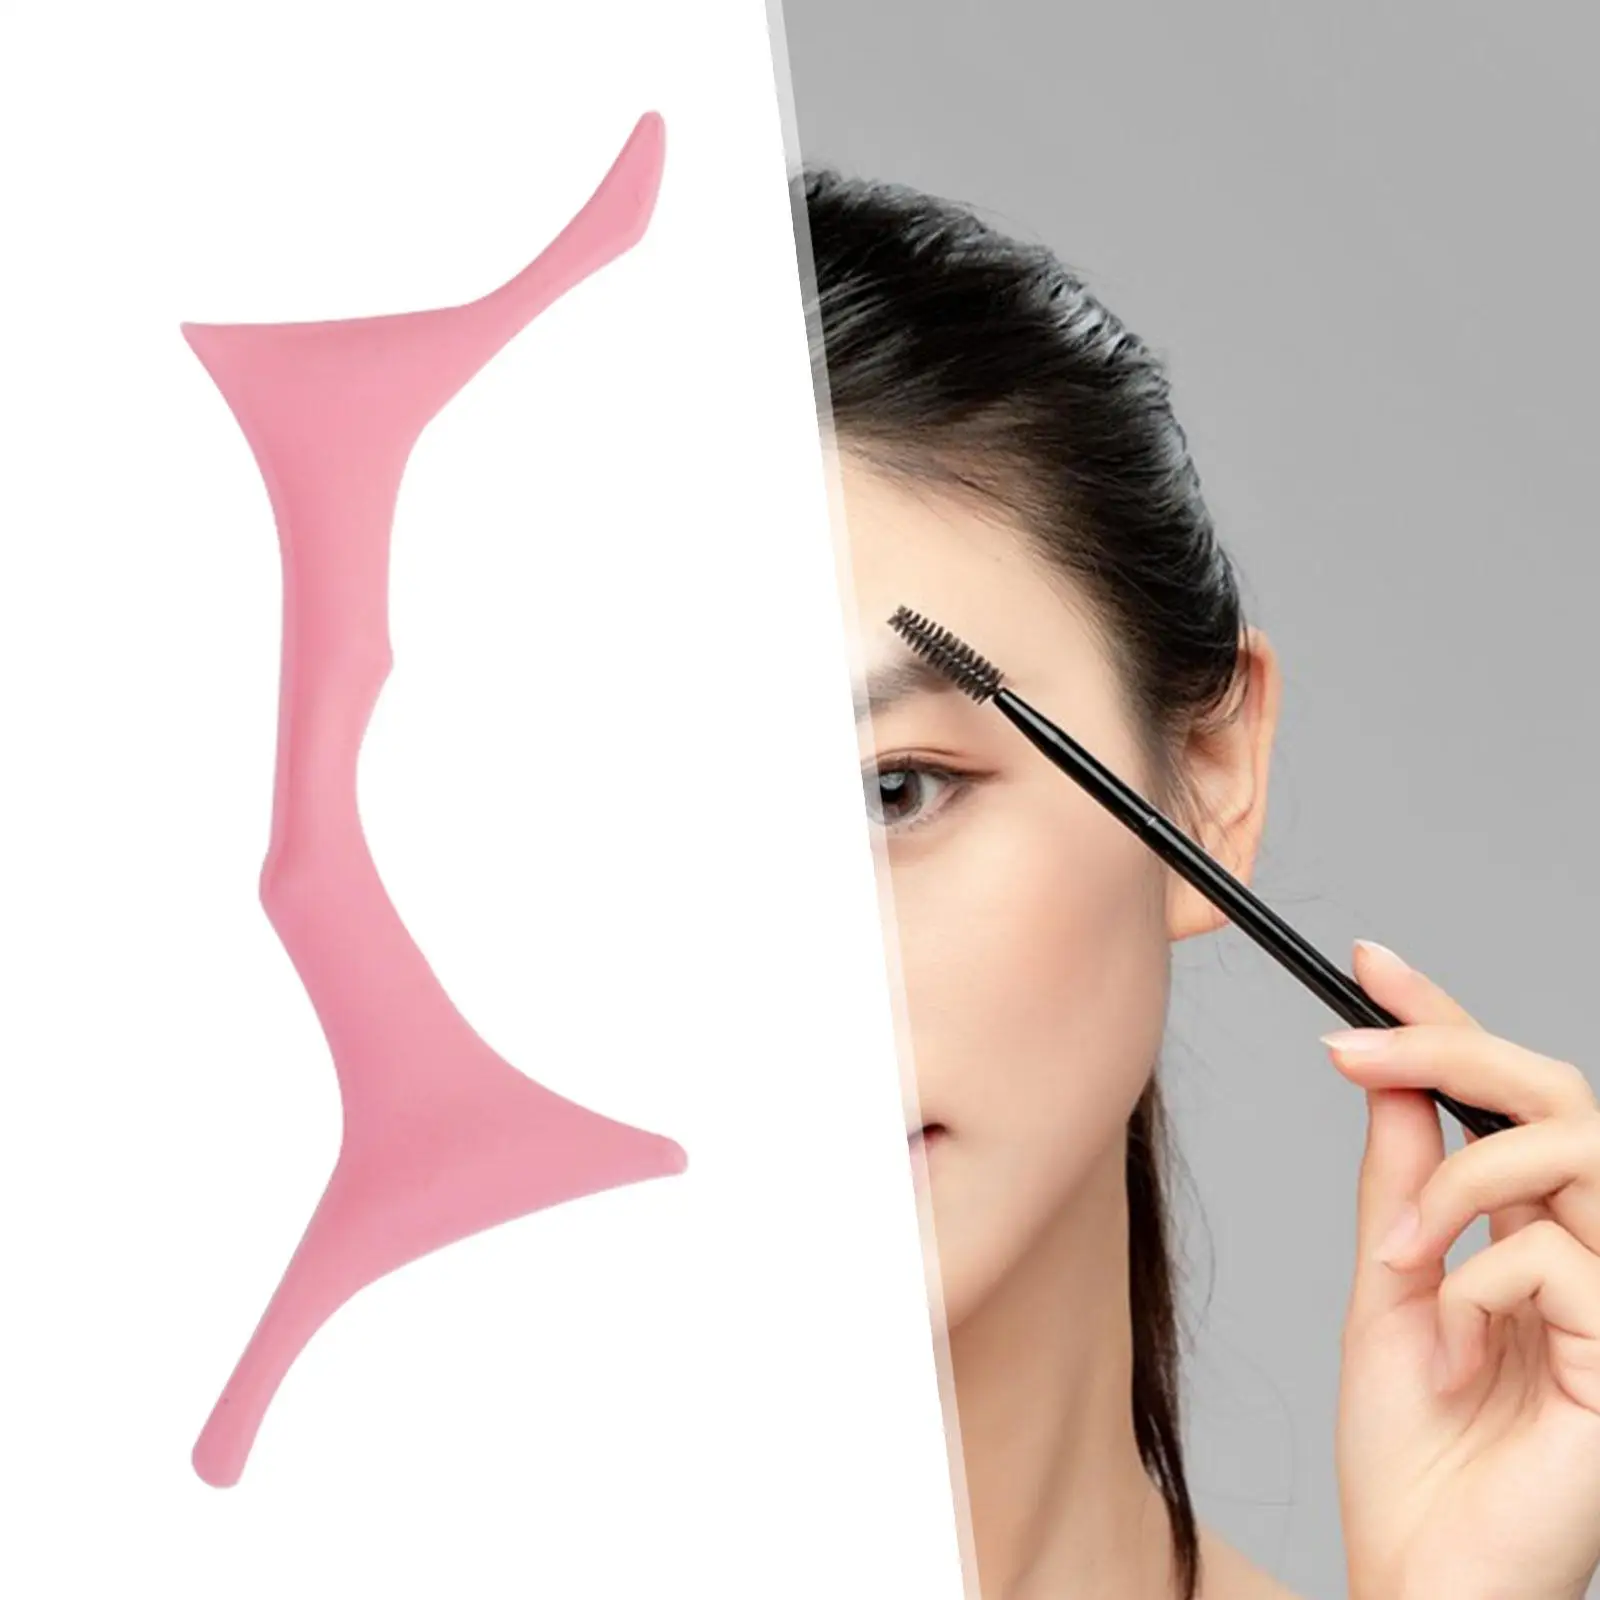 Silicone Eyebrow Shaping Tool Eyeliner Stencil Comfortable to Hold Practical Versatile Eyeliner Guide Tool for Beginners